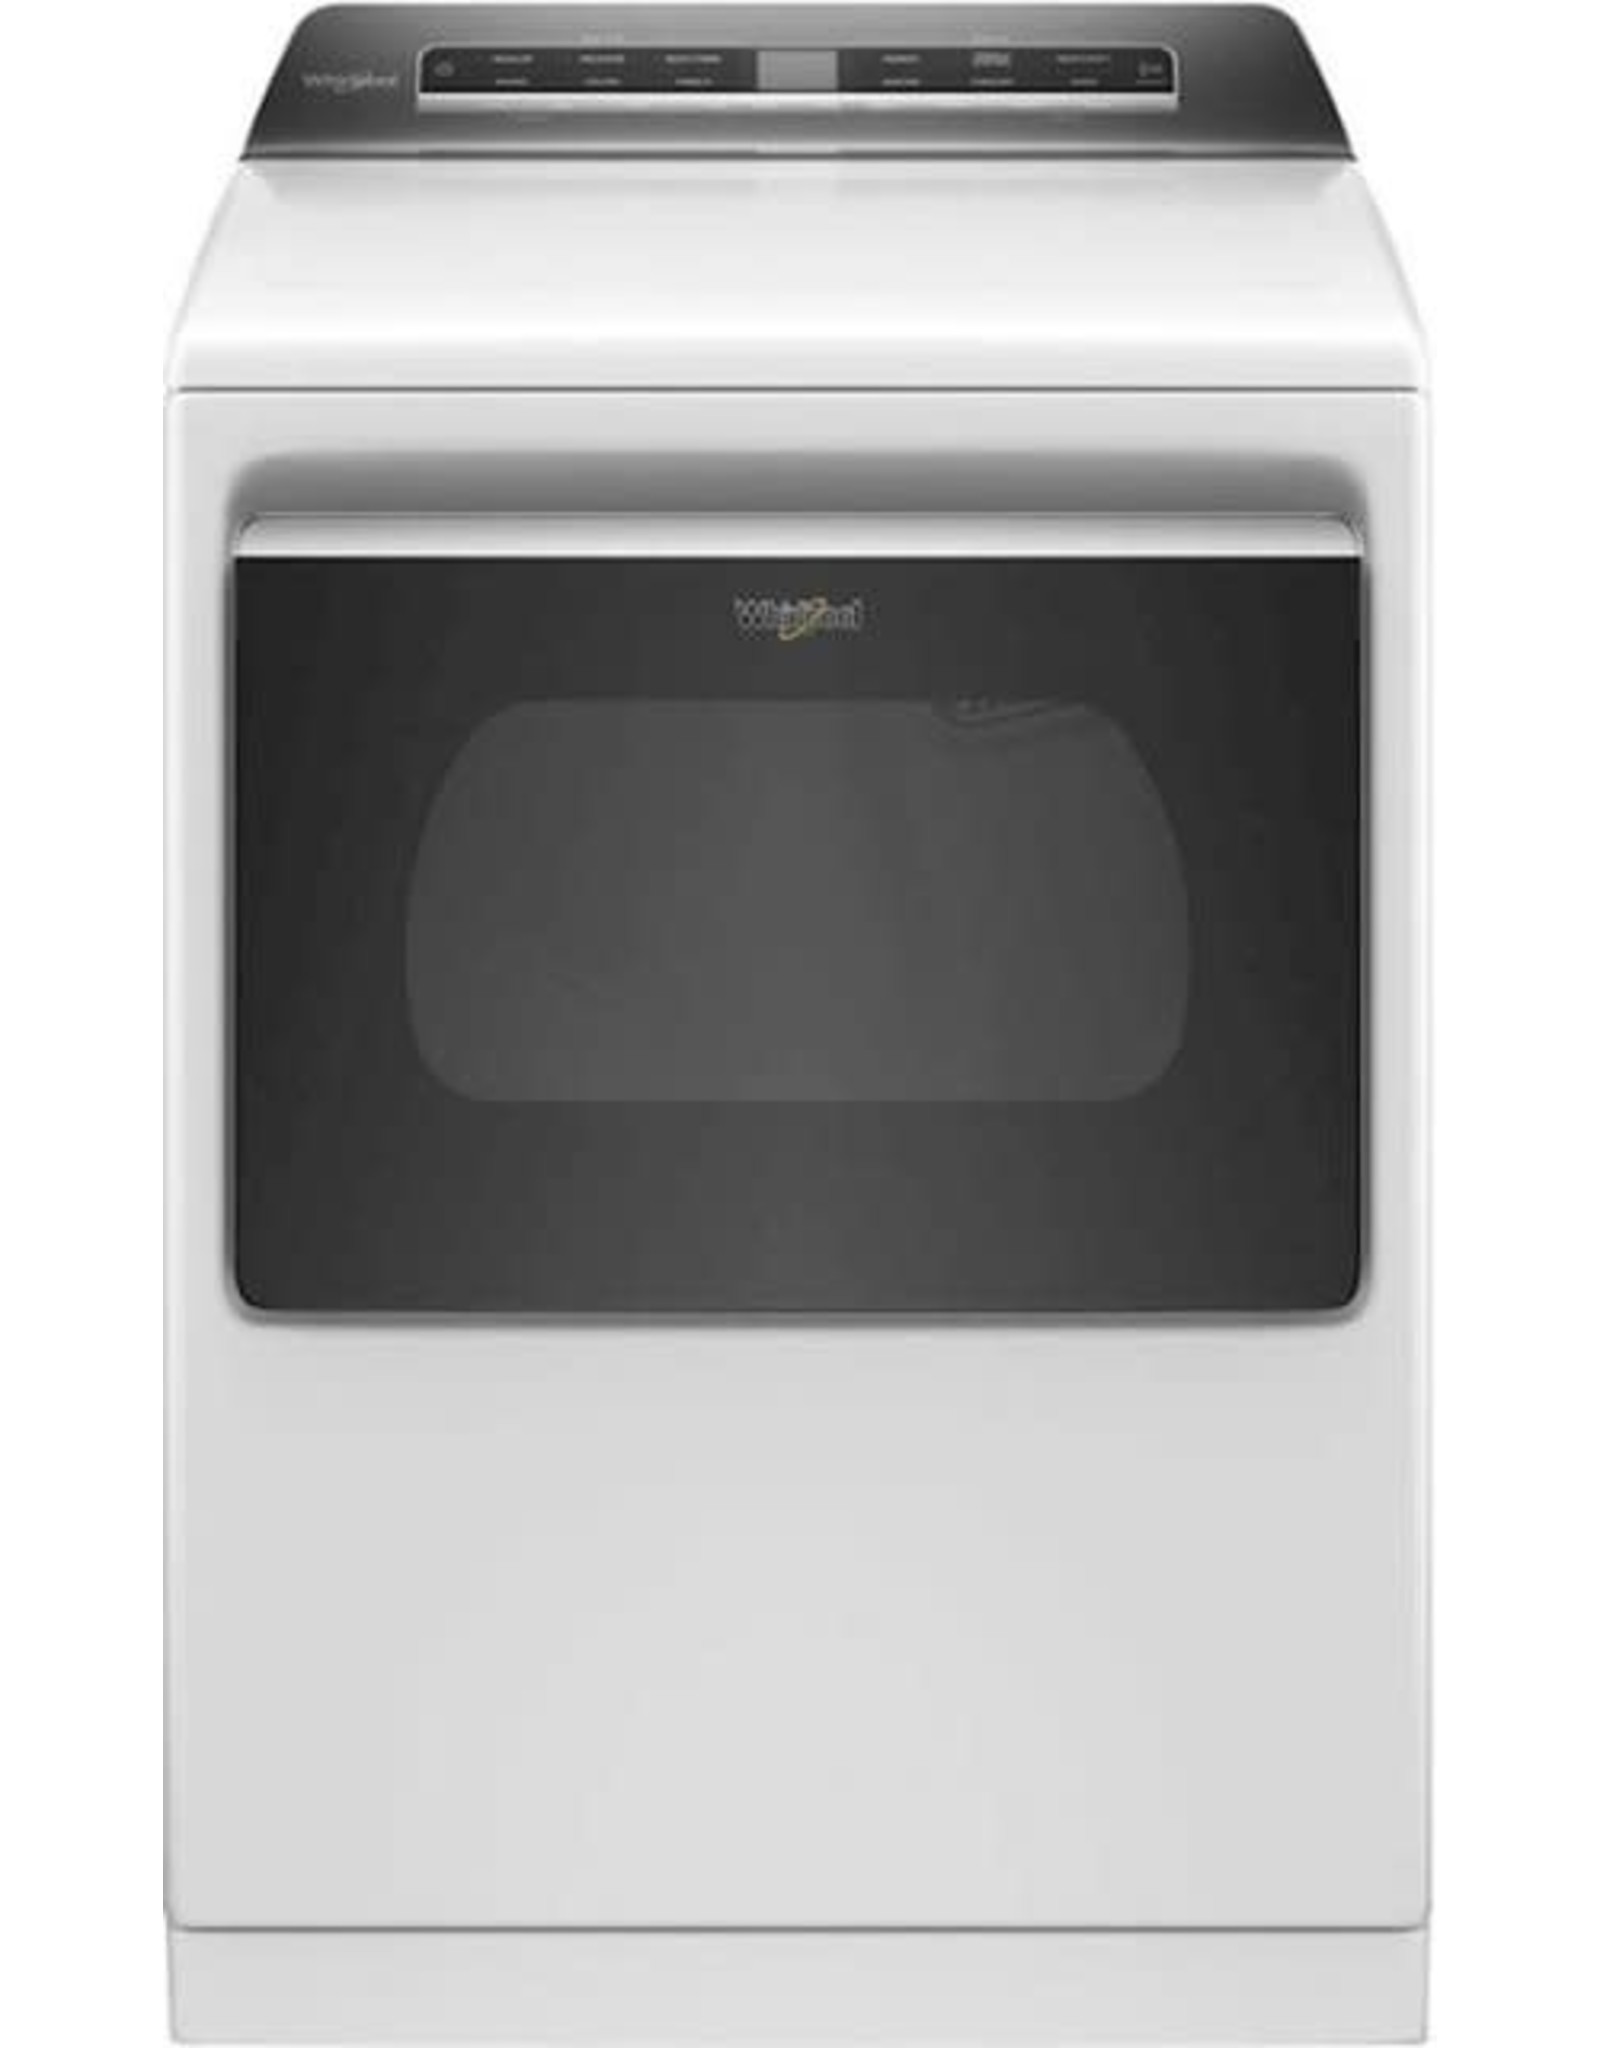 WHIRLPOOL 7.4 cu. ft. 120-Volt Smart Gas Vented Dryer in White with a Hamper Door and Steam, ENERGY STAR